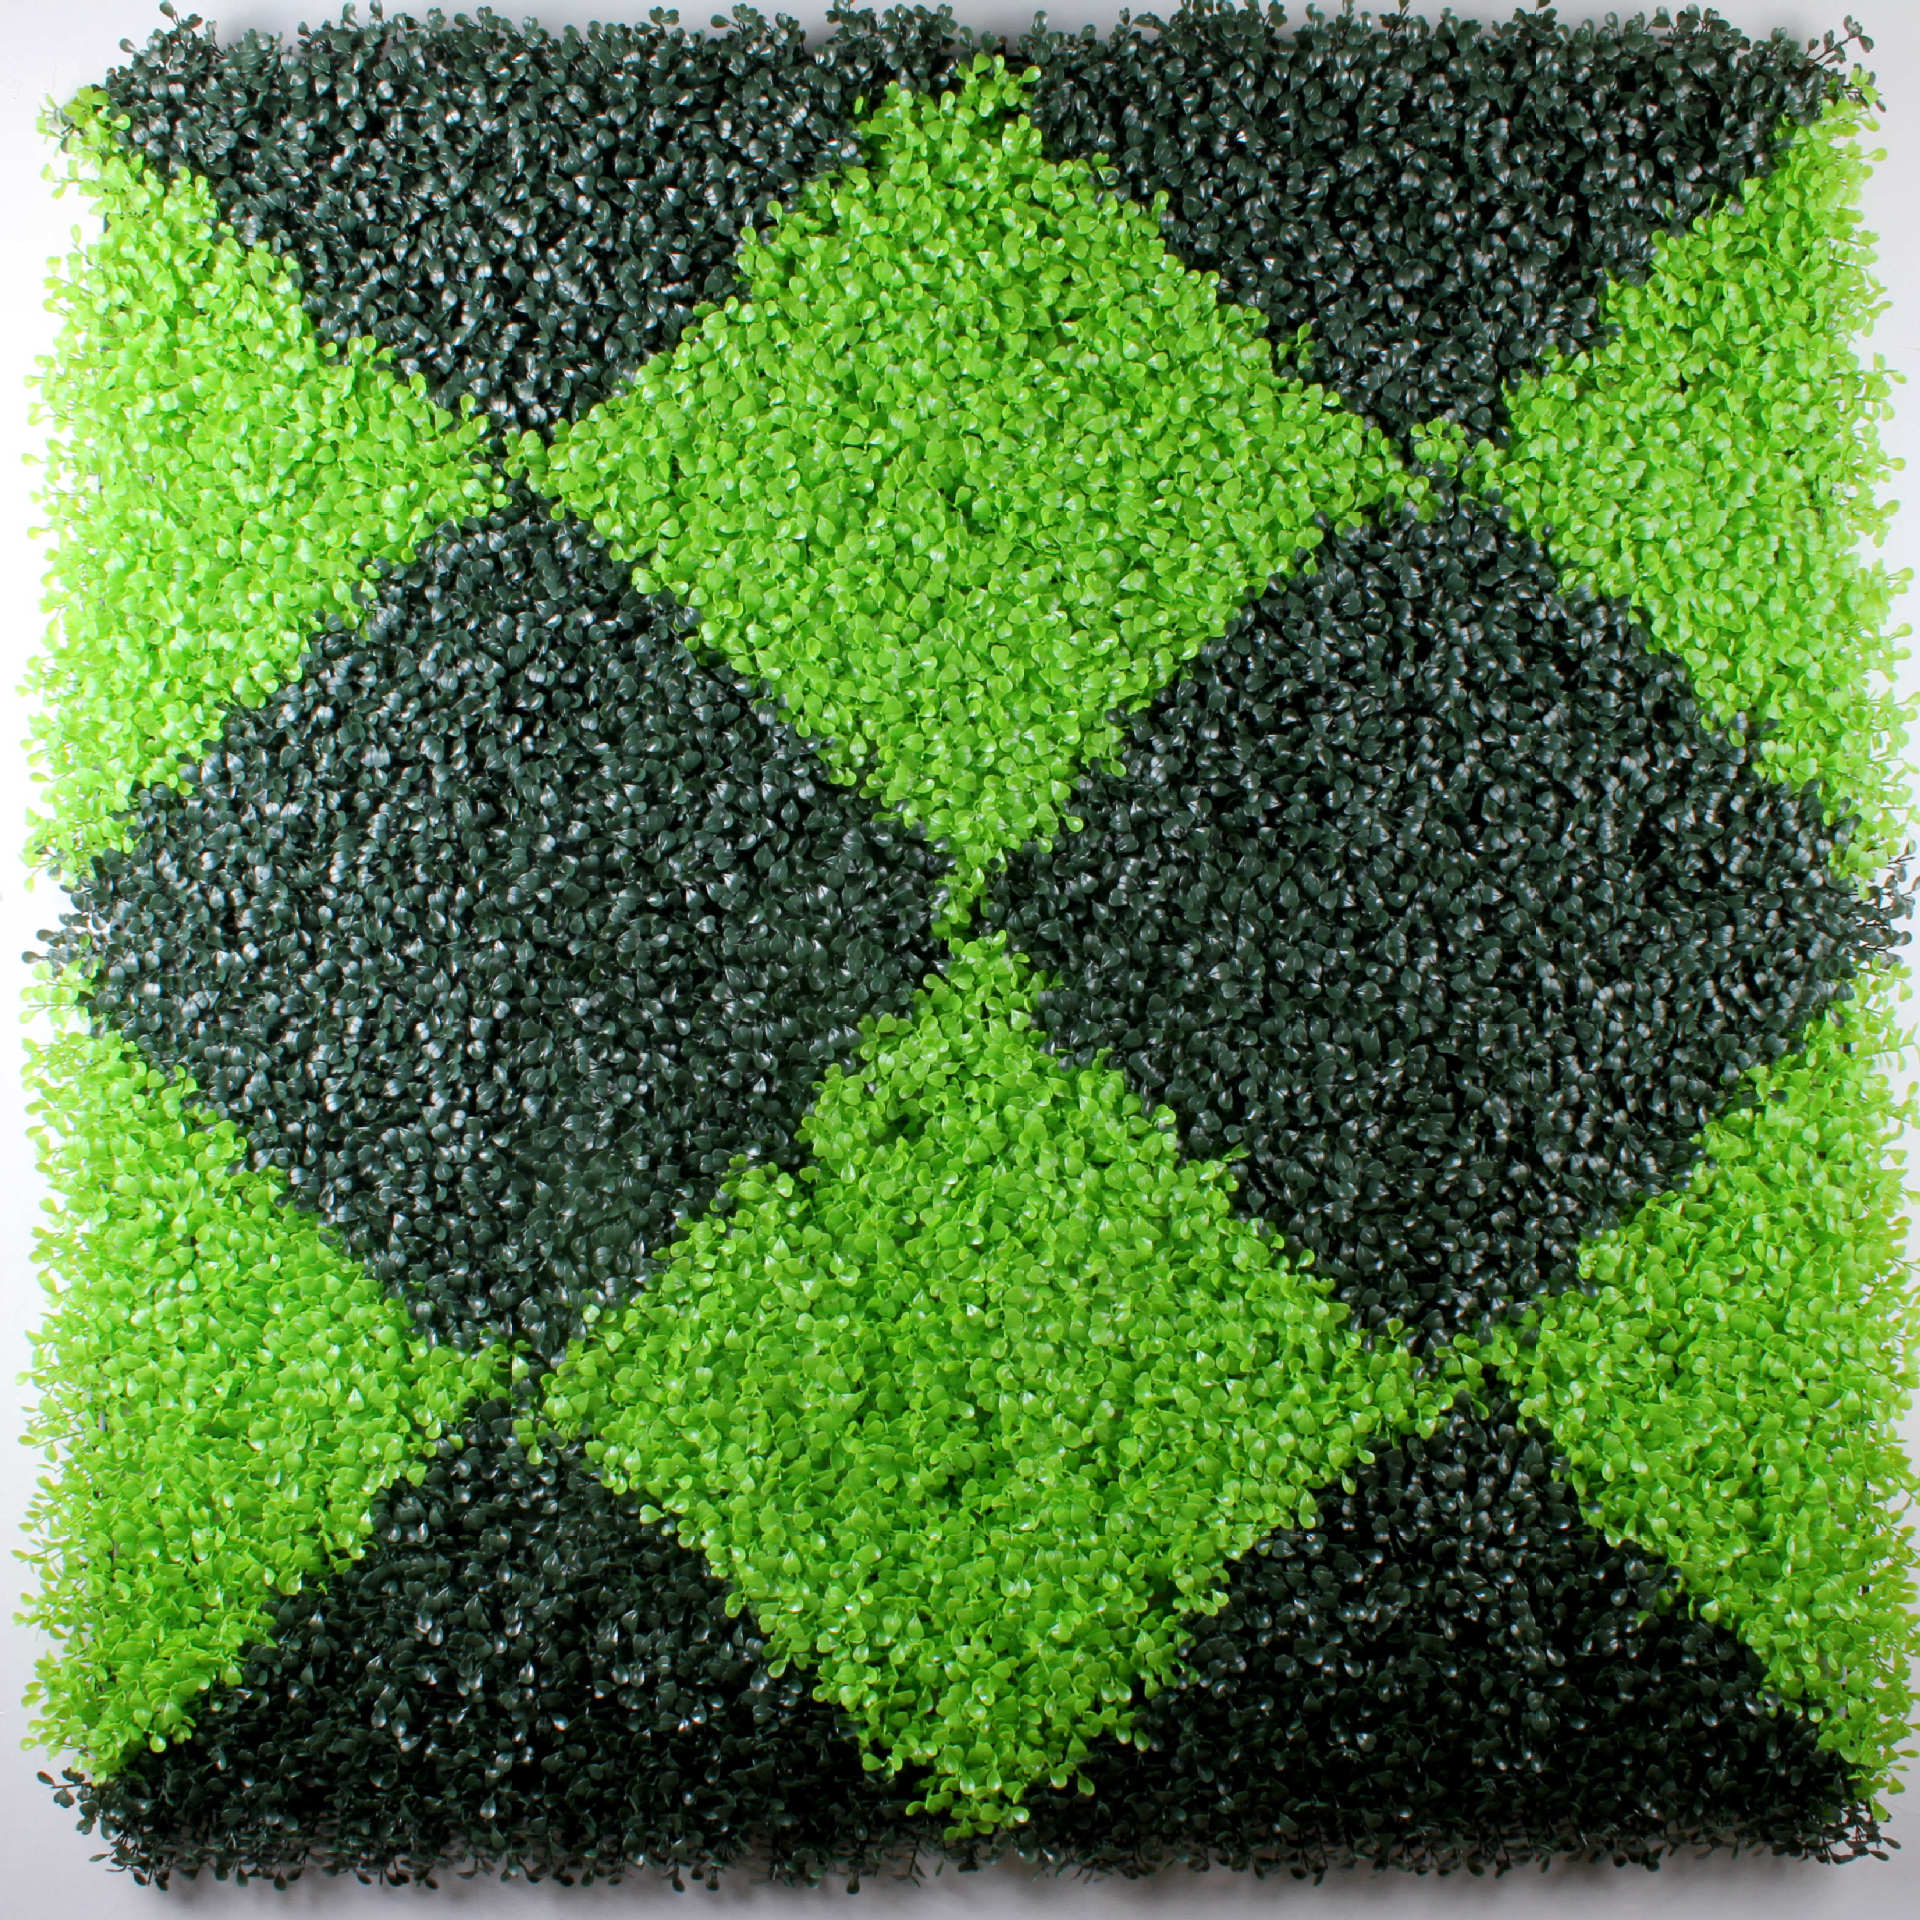 Emulational Lawn Plant Wall 4-Layer Milan Grass Sun Protection 50*50 Wall Decoration UV-Resistant Plastic Turf